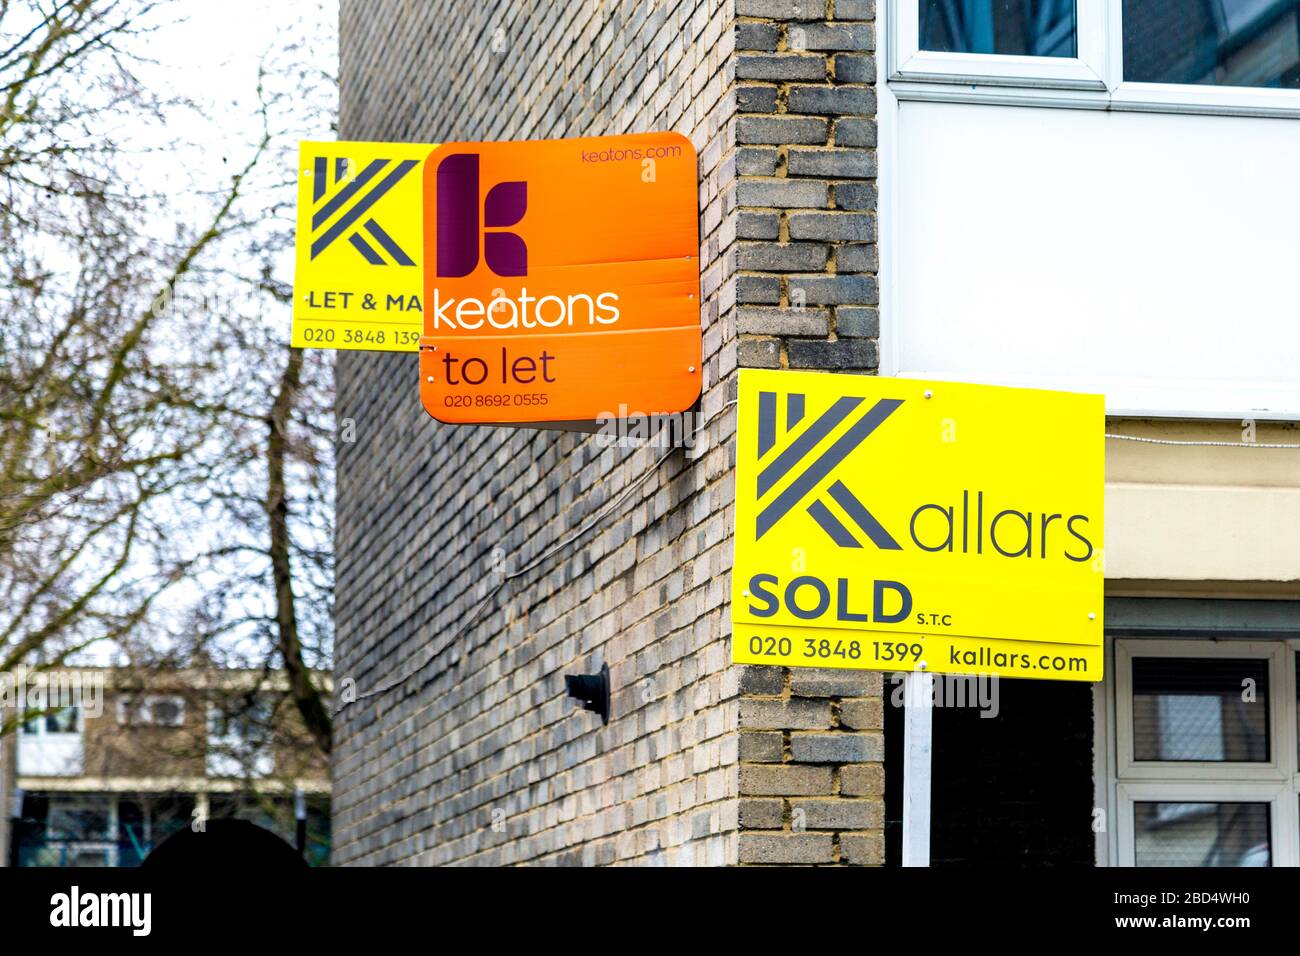 To Let and Sold signs from real estate agents on the facade of a building, London, UK Stock Photo